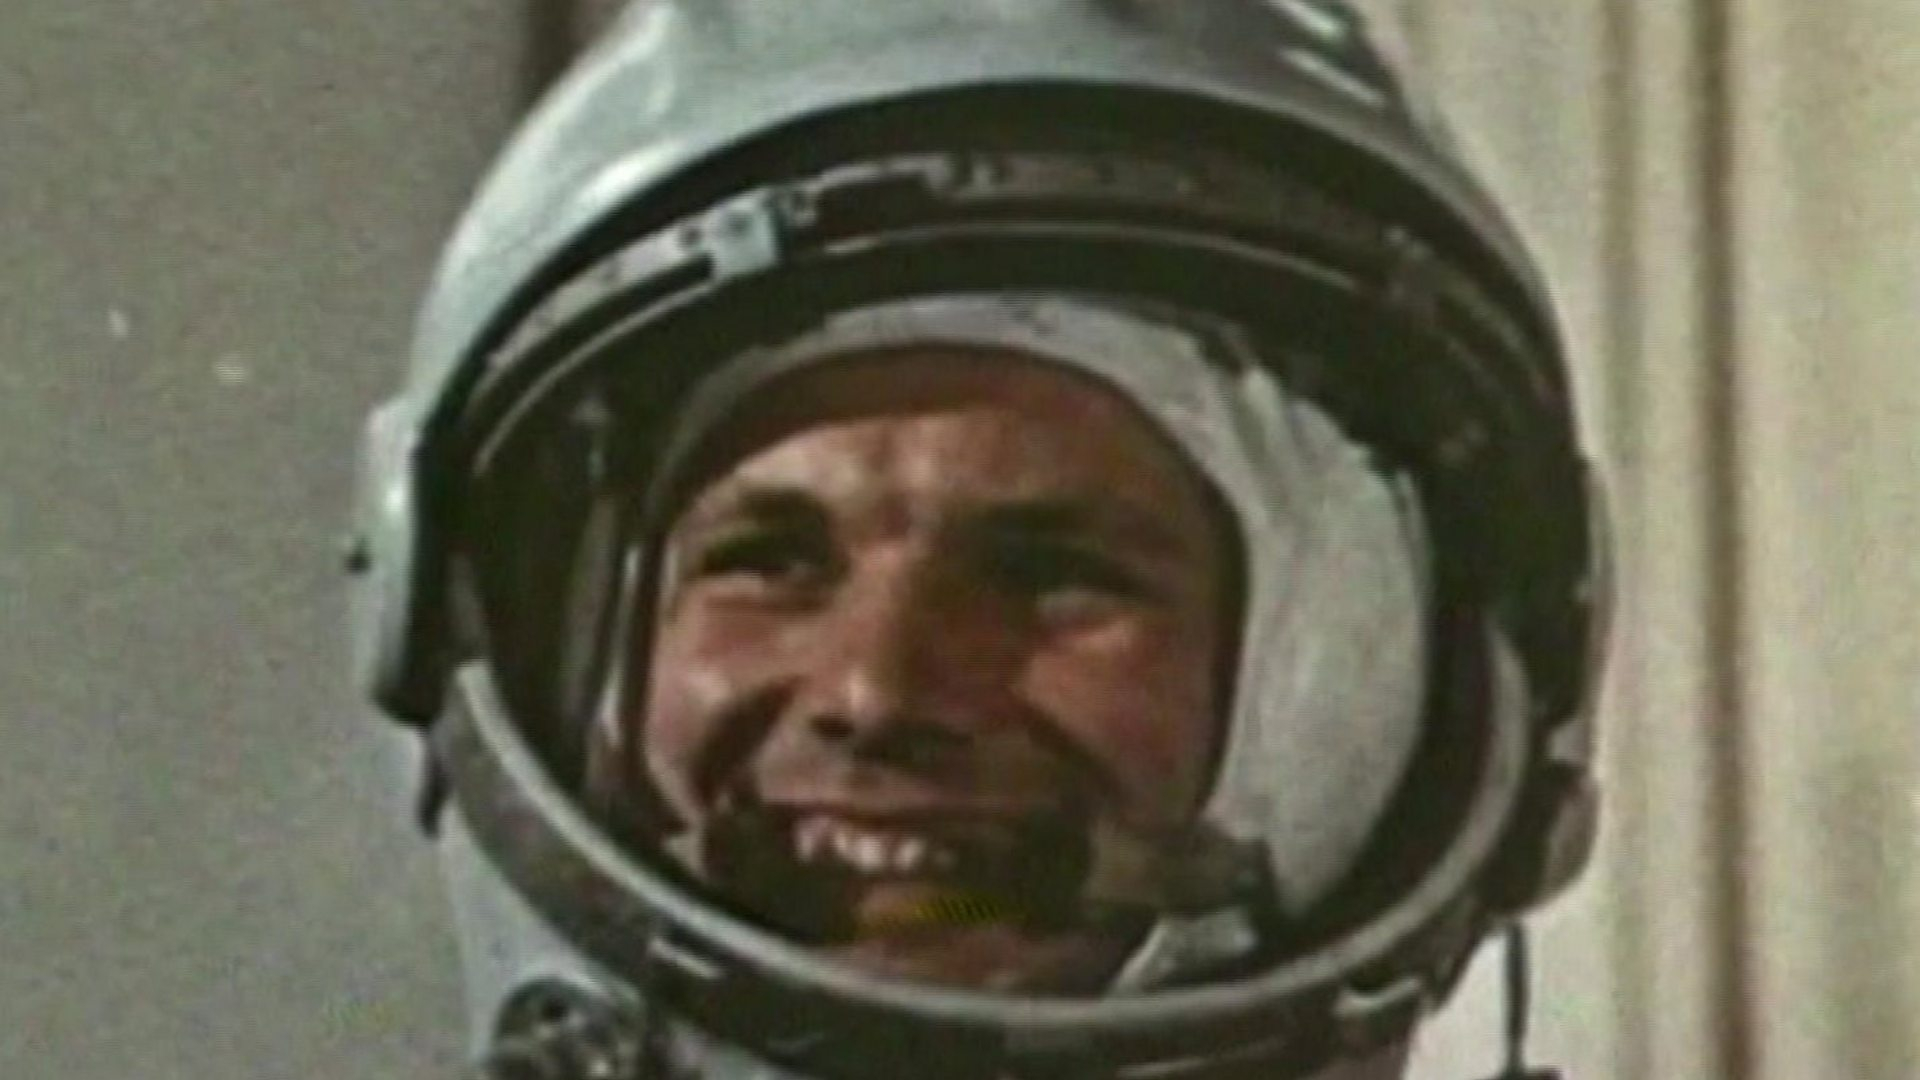 1920x1080 Yuri Gagarin: Sixty years since the first man went into space BBC News